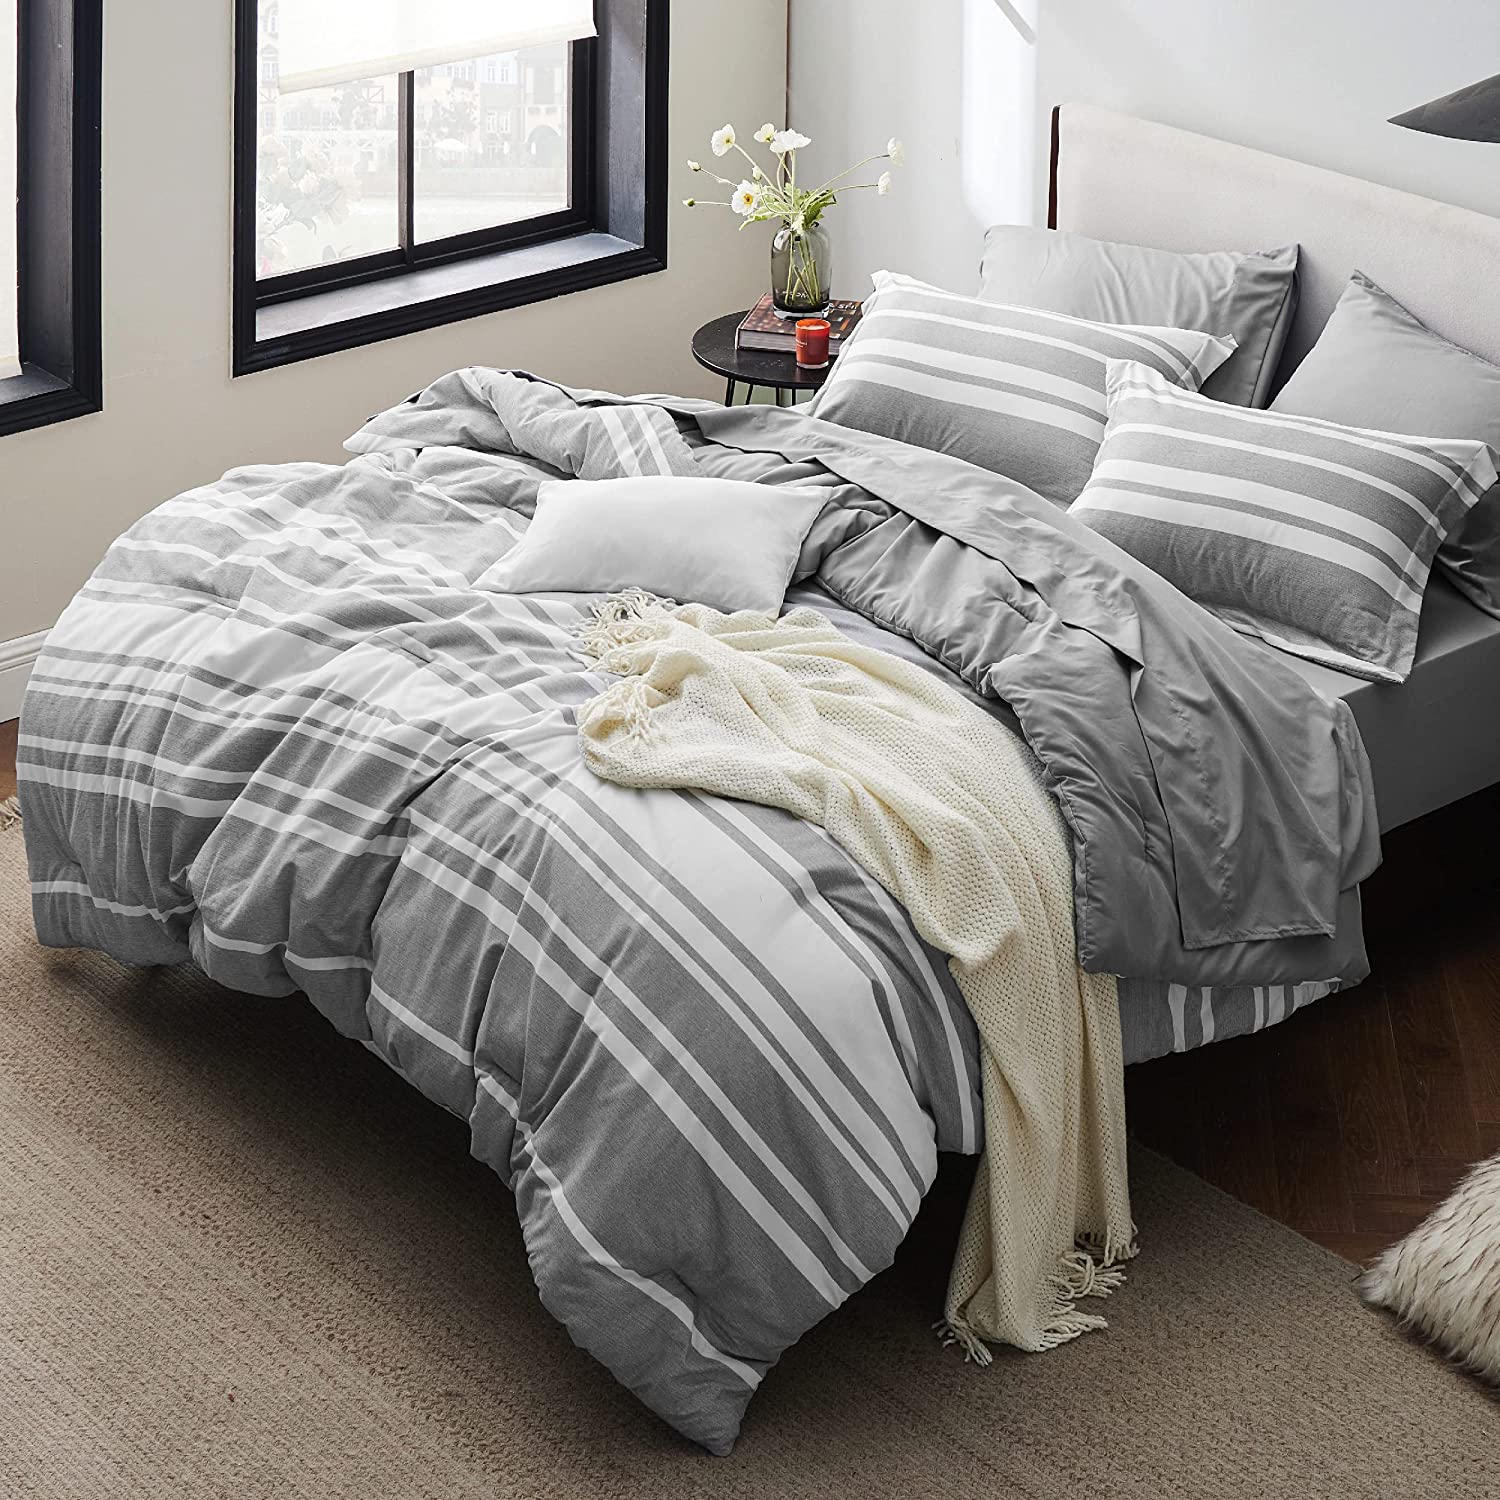  Bedsure Twin Comforter Set 5 Pieces, Gray White Striped Twin Bedding  Sets All Season Bed Set, Twin Bed in a Bag with Comforter, Sheets,  Pillowcase & Sham : Home & Kitchen